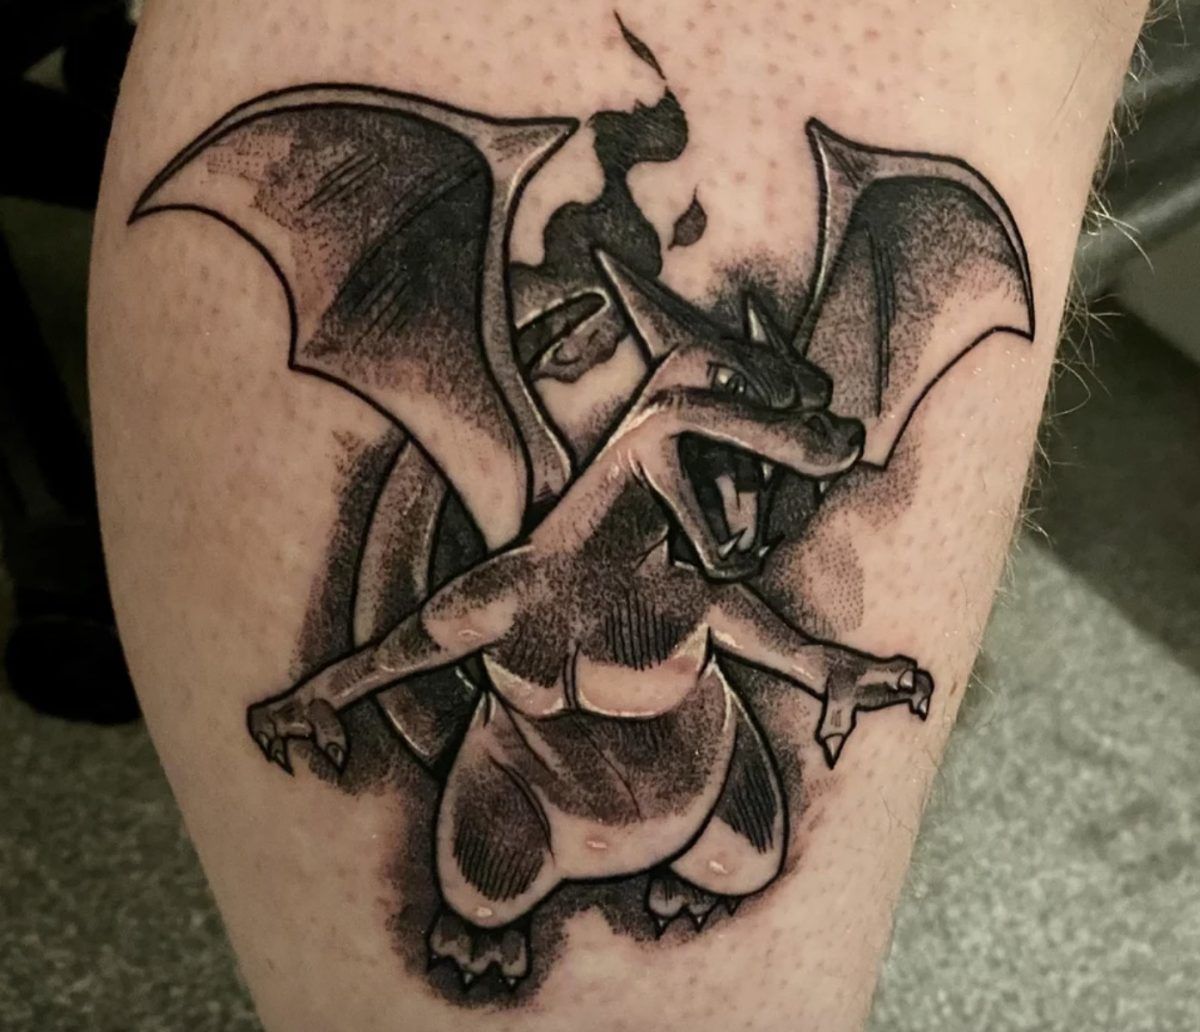 Tattoo of Charizard in a charcoal style